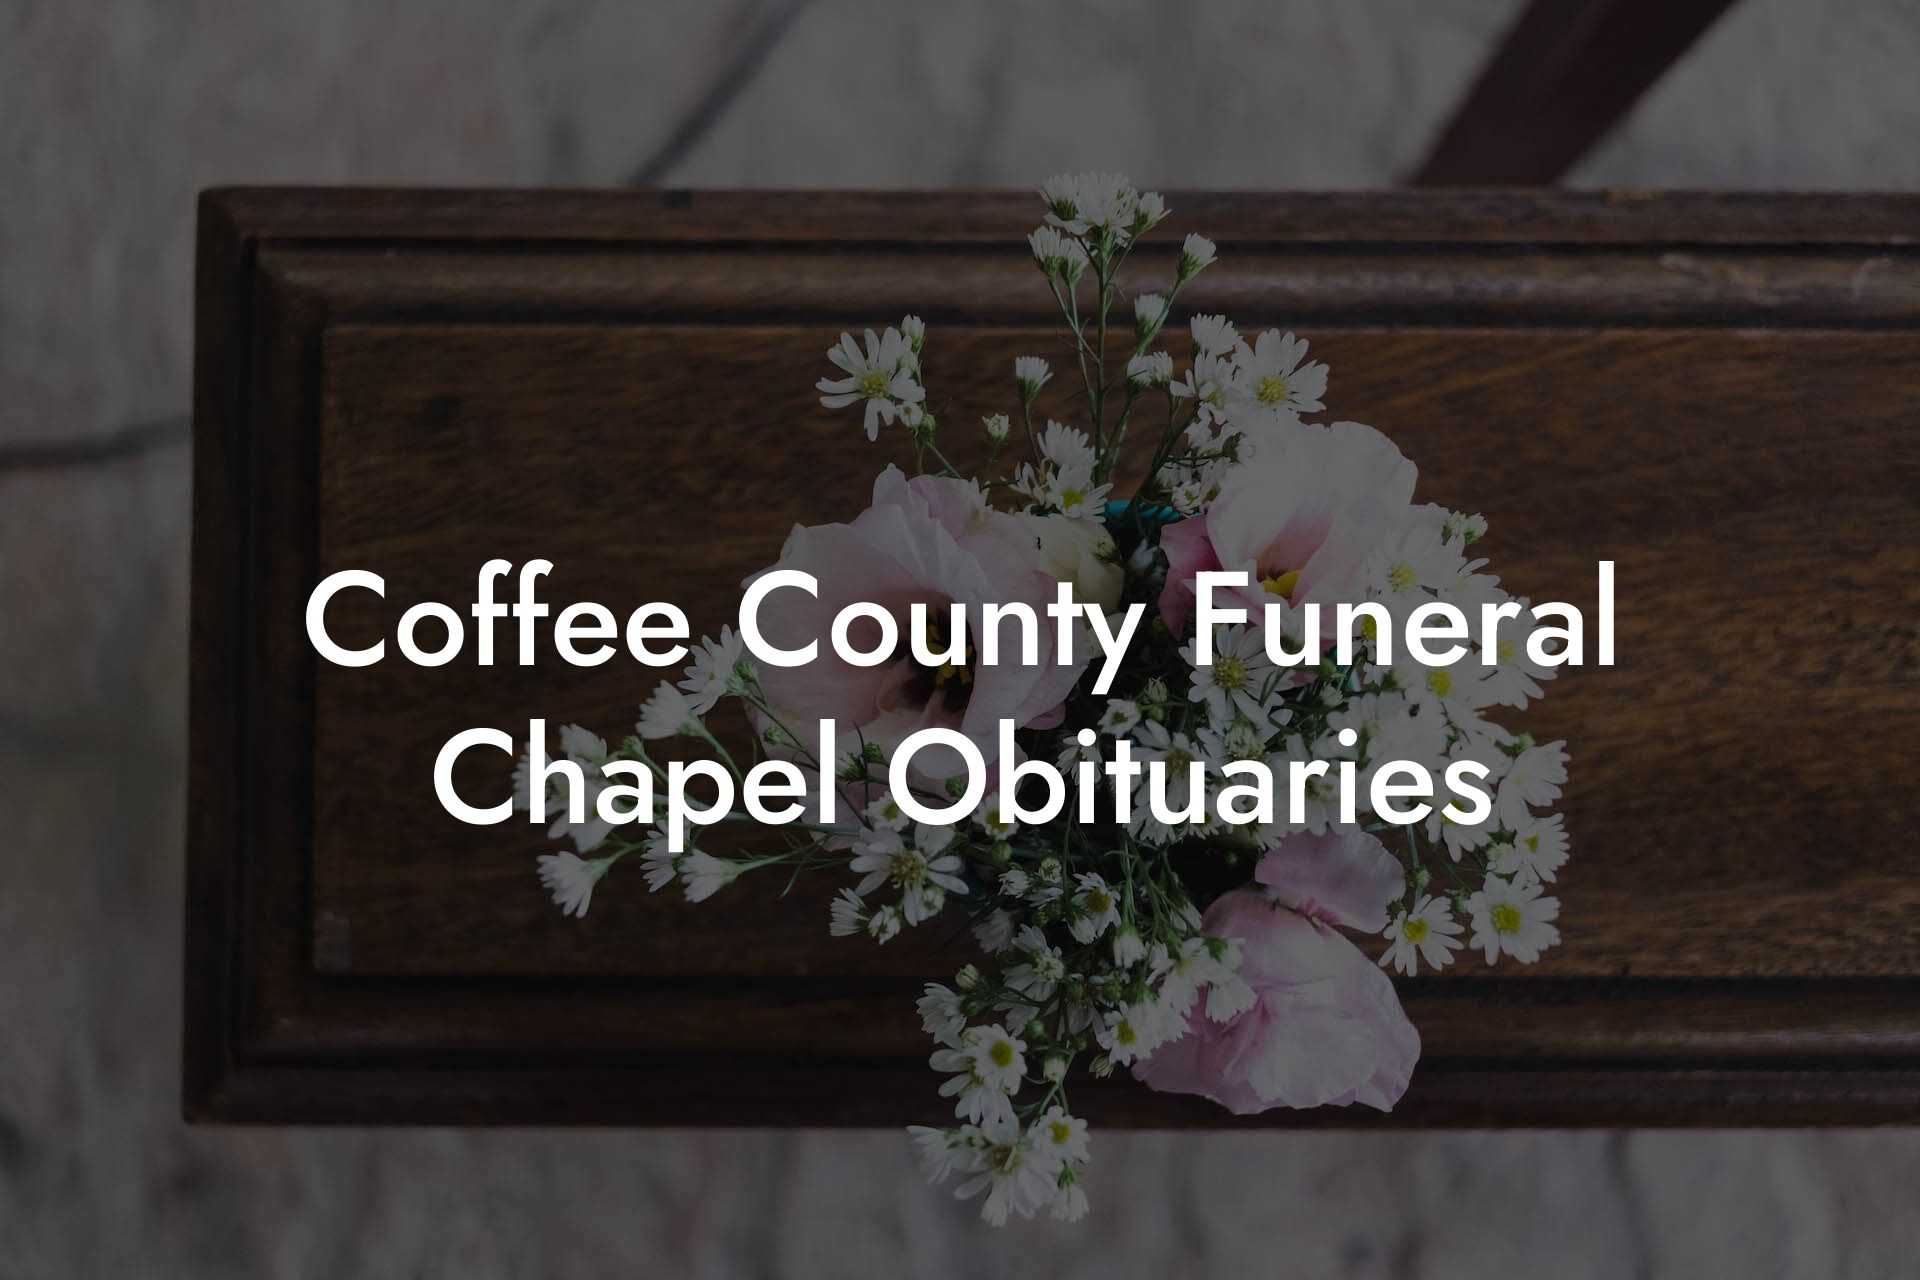 Coffee County Funeral Chapel Obituaries